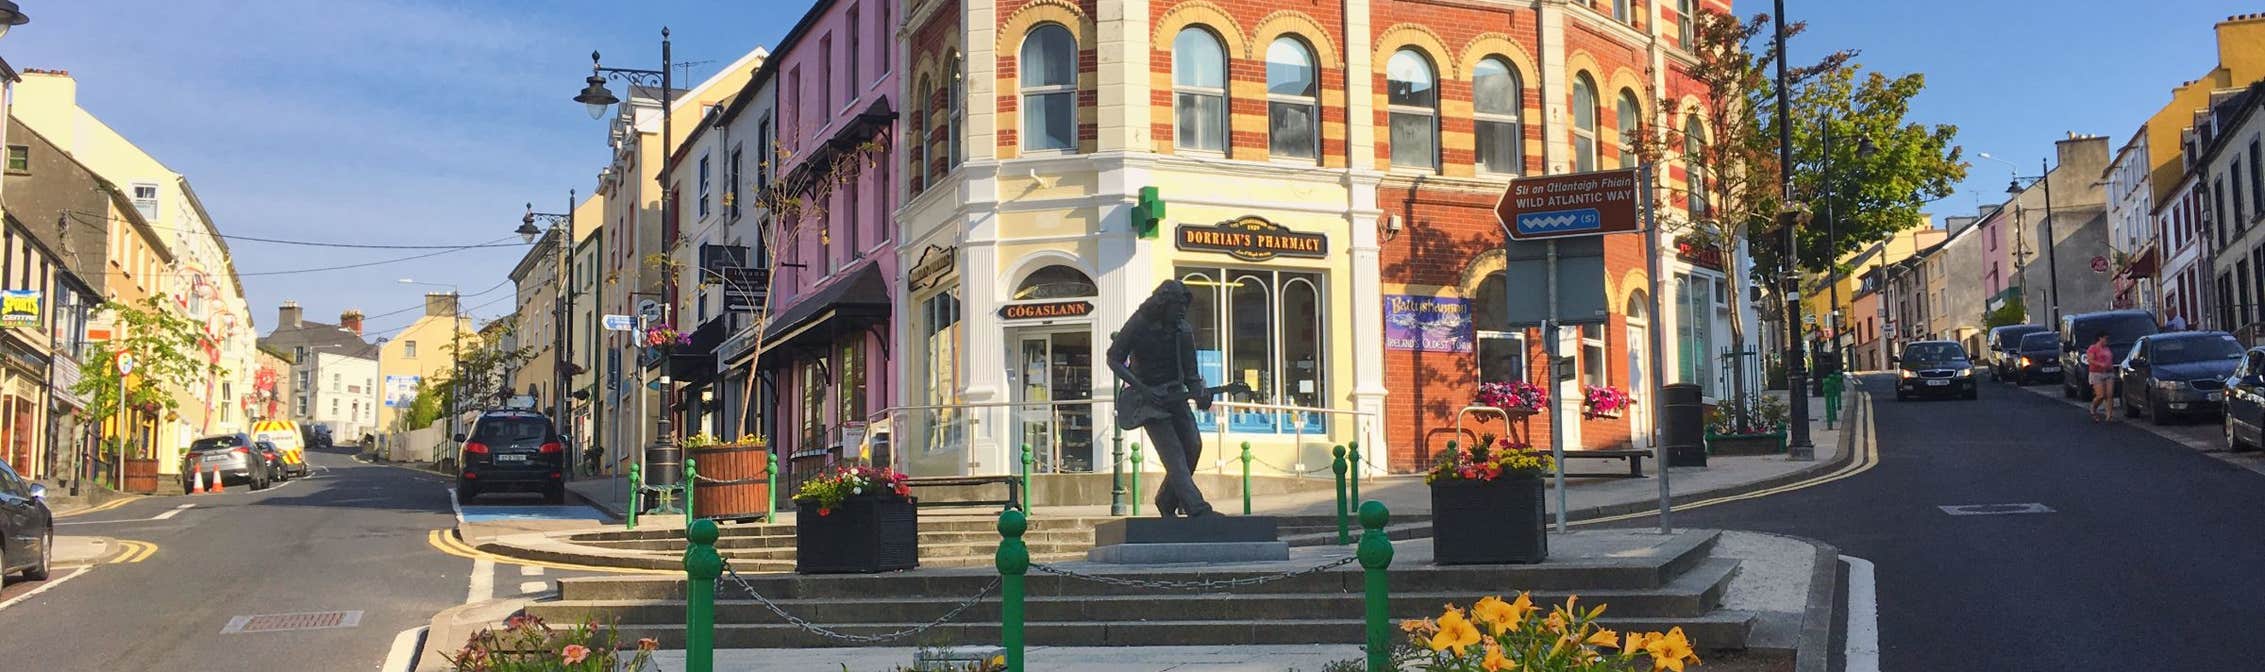 Rory Gallagher Statue in Ballyshannon, County Donegal